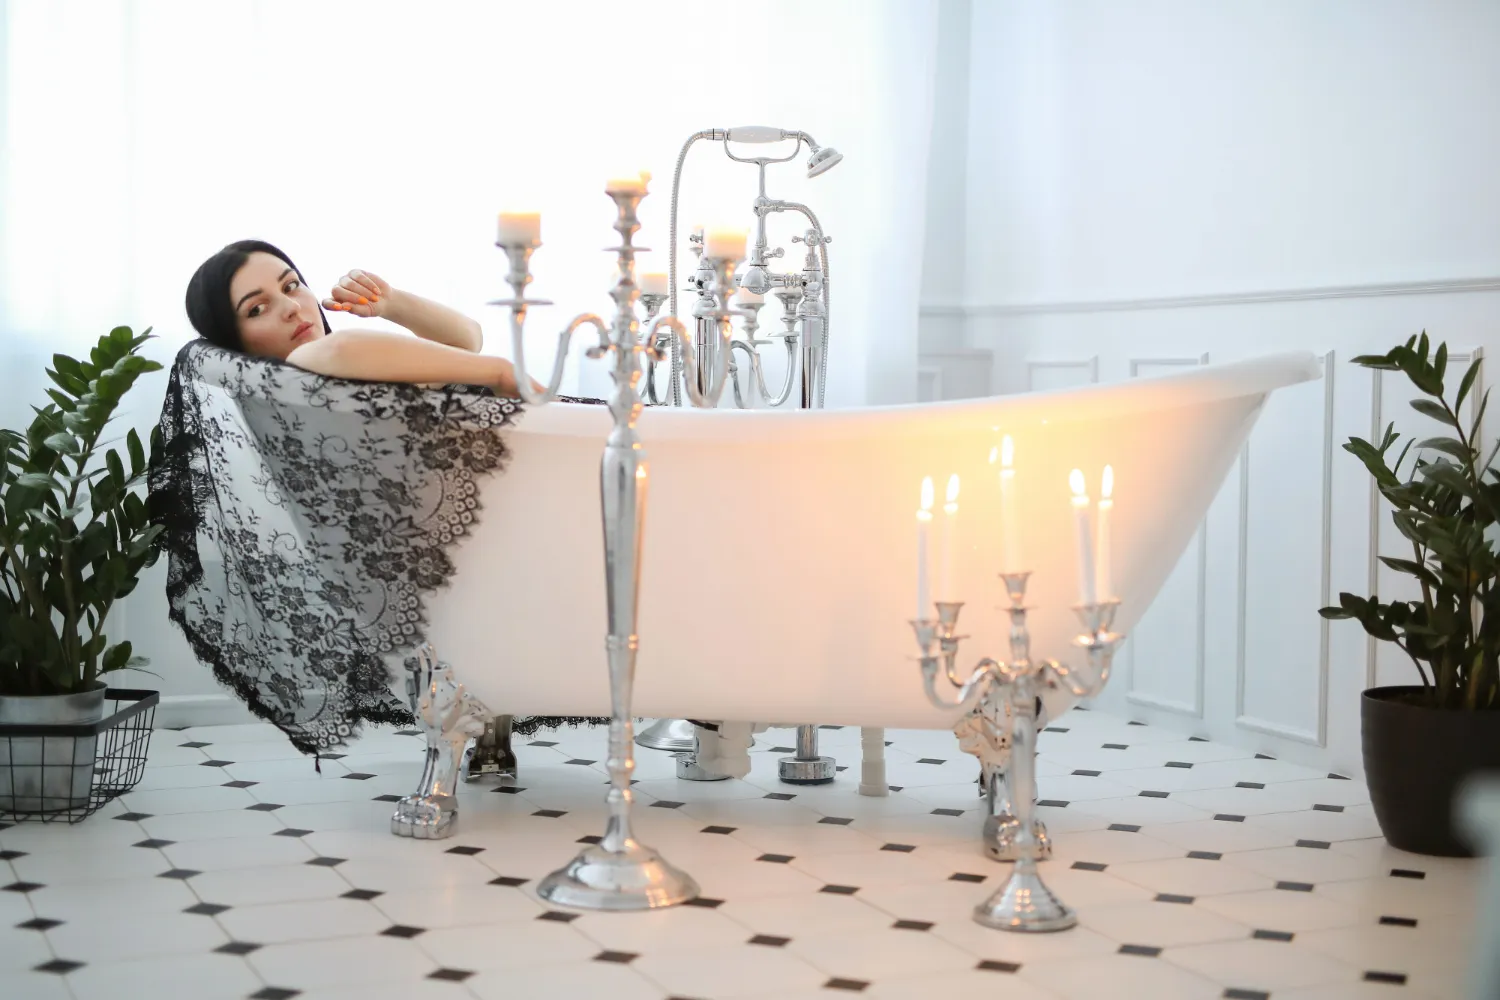 walk in bathtub may not be as comfortable as a traditional bathtub